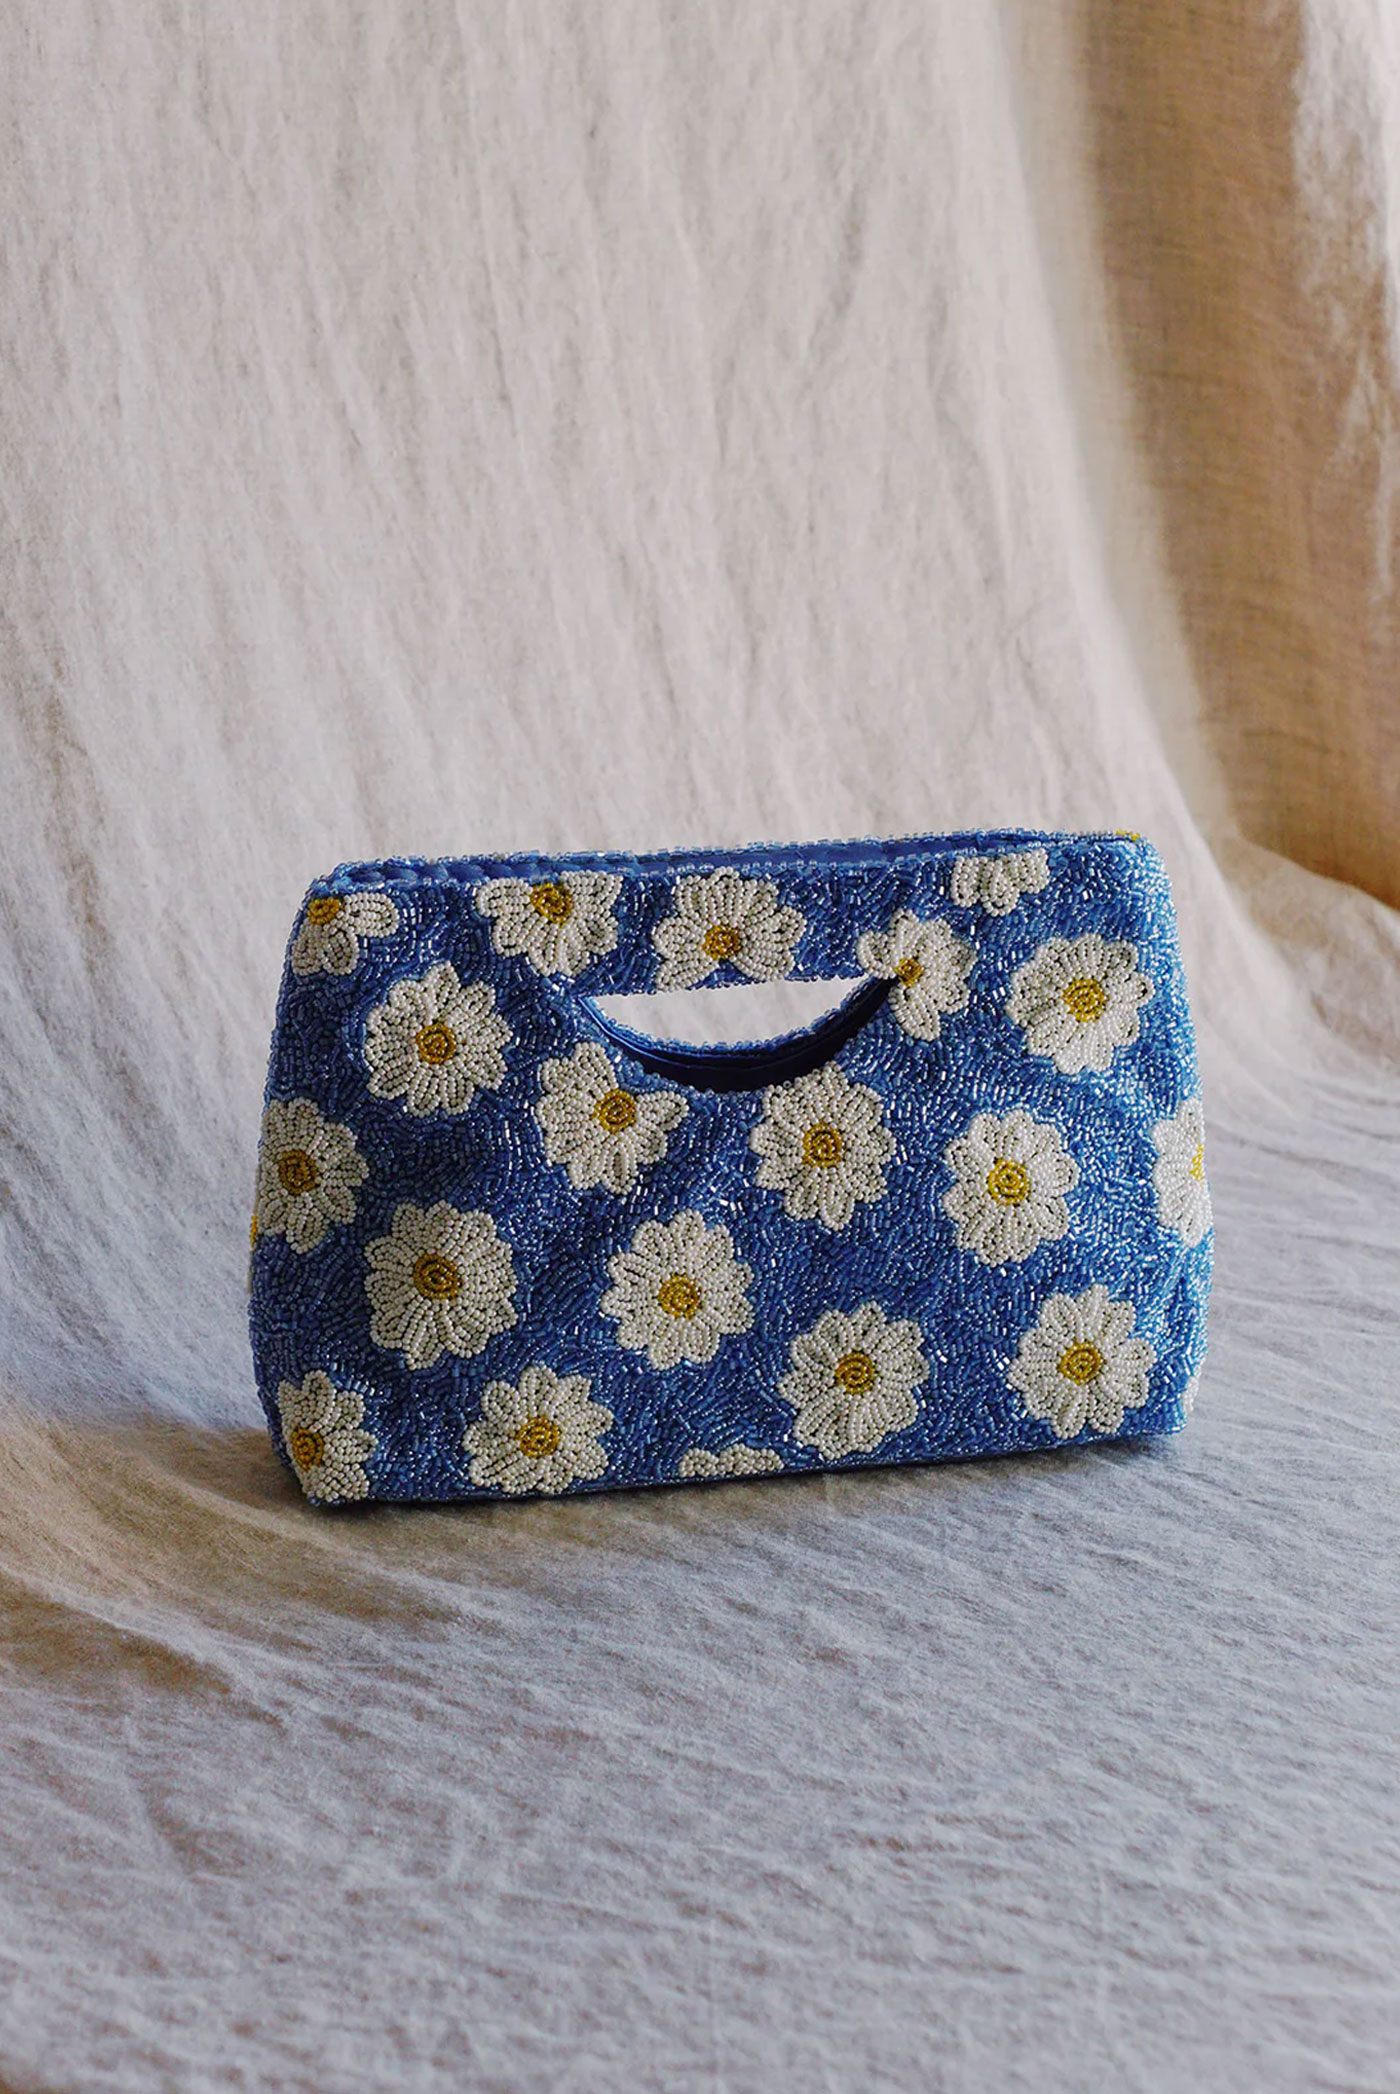 ethically made daisy beaded bag by wallflower shop